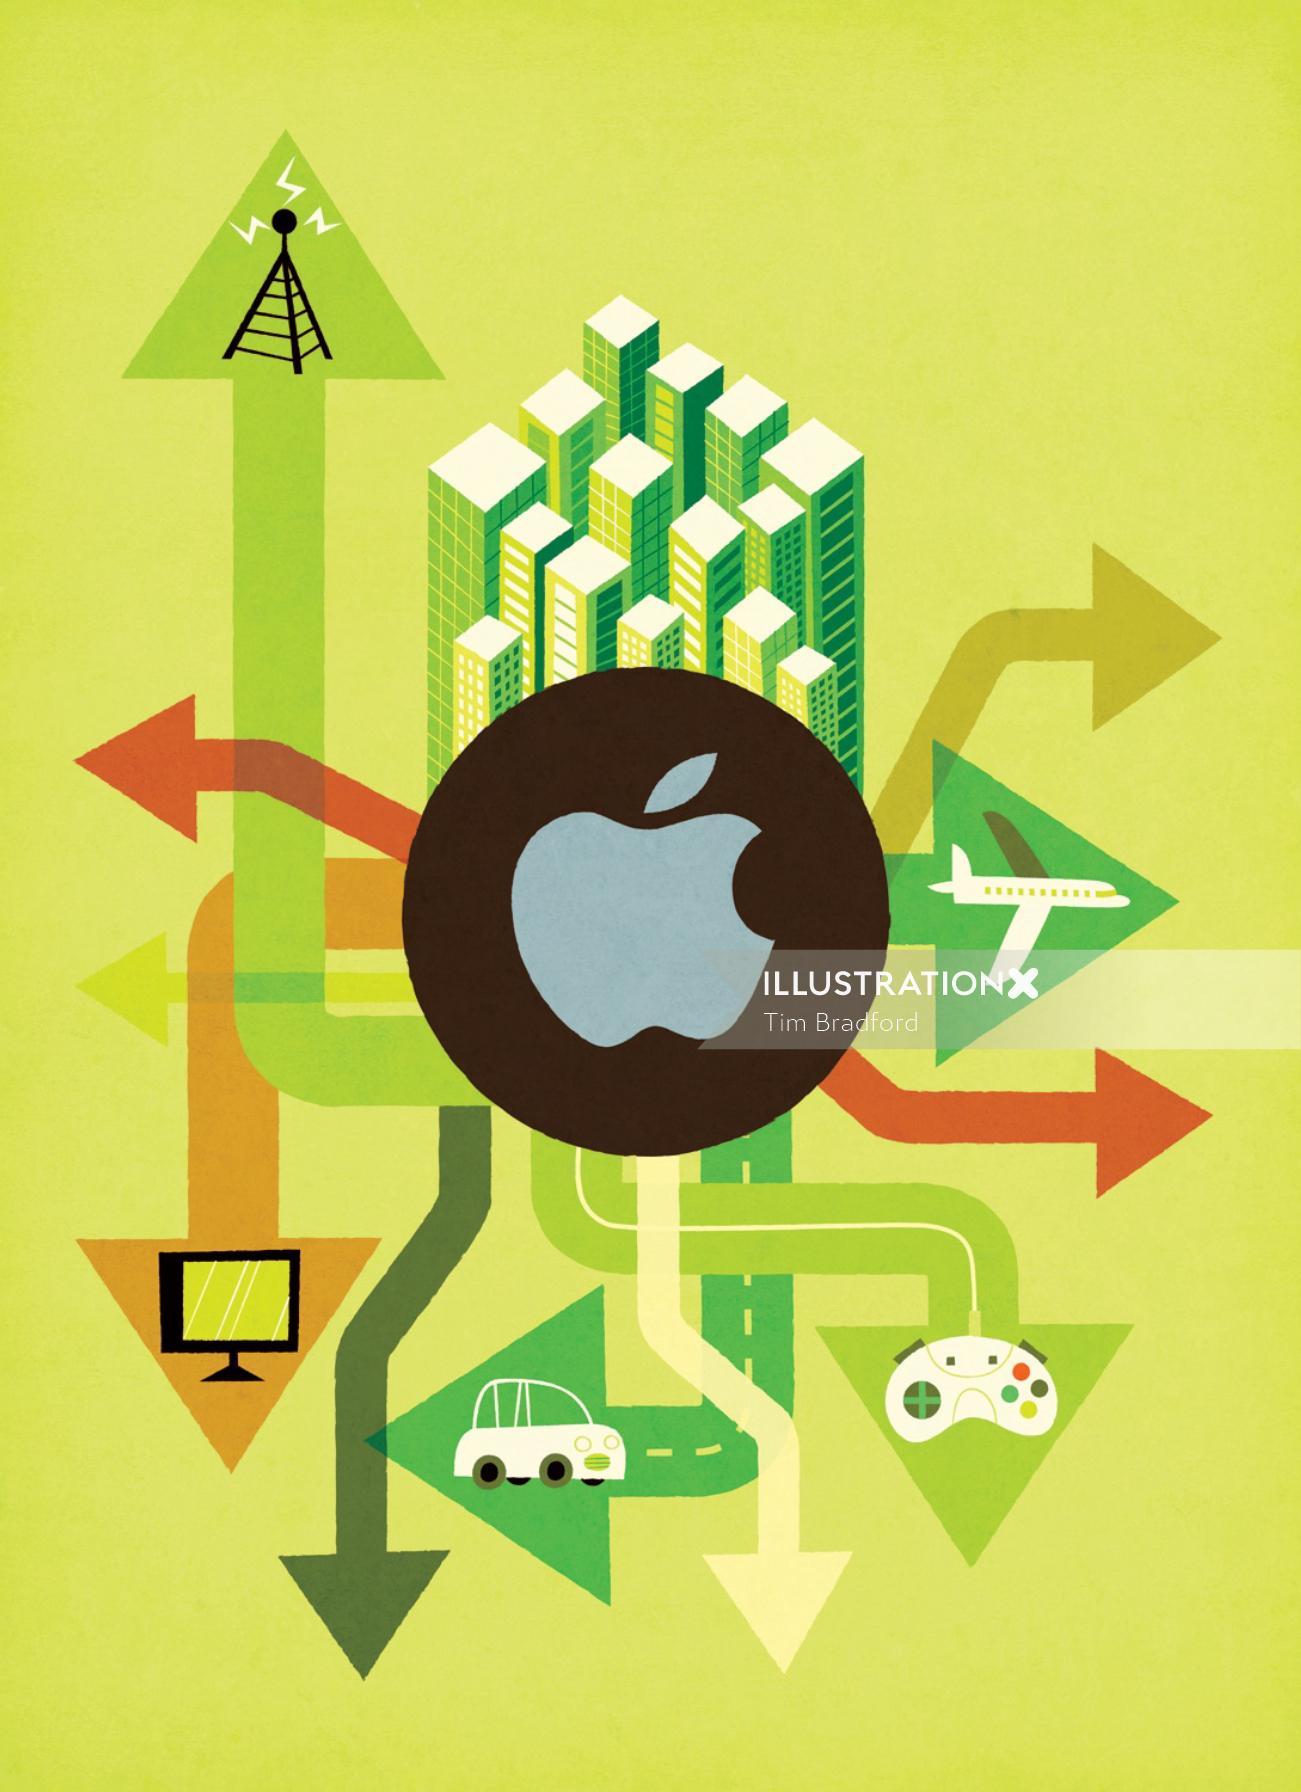 Business Apple graphic
